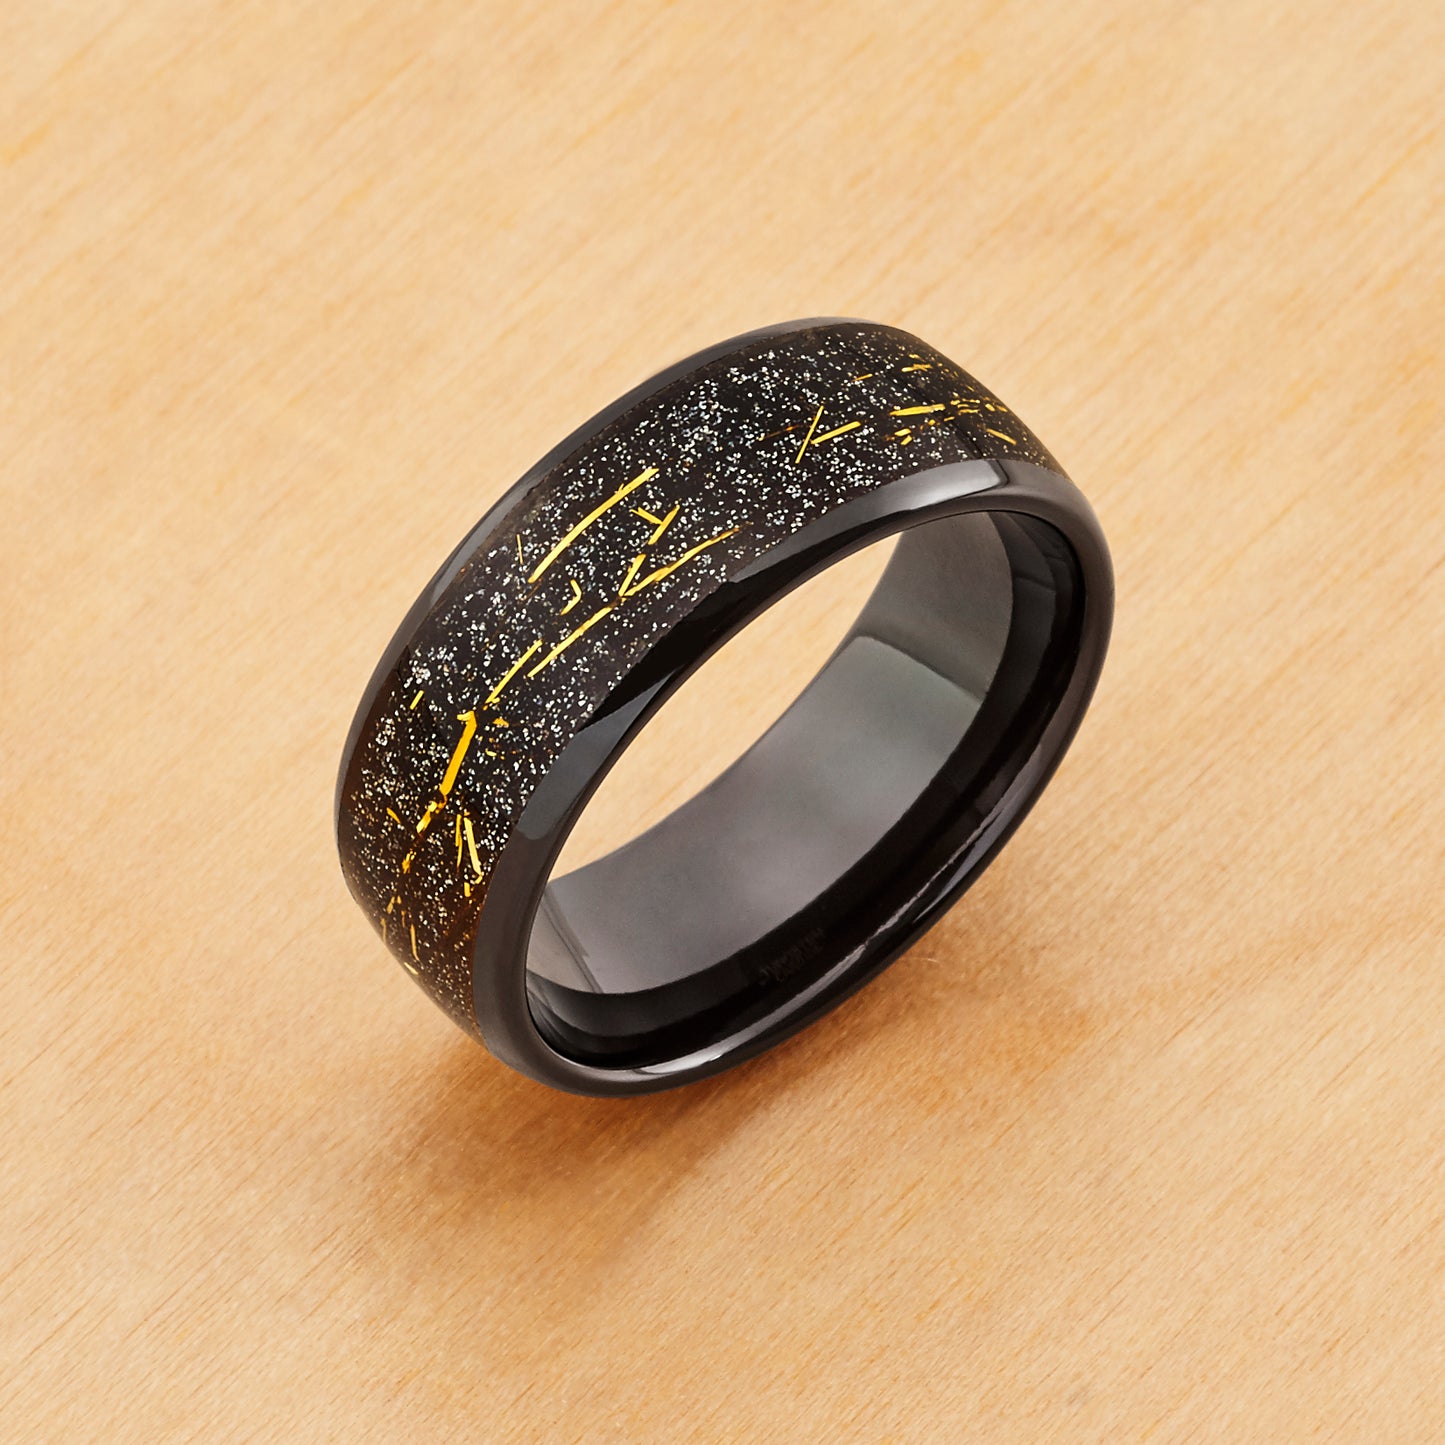 TR913 - Black Plating - Tungsten Ring 8mm, Black IP Plated Domed Ring with Imitation Yellow Meteorite Inlay